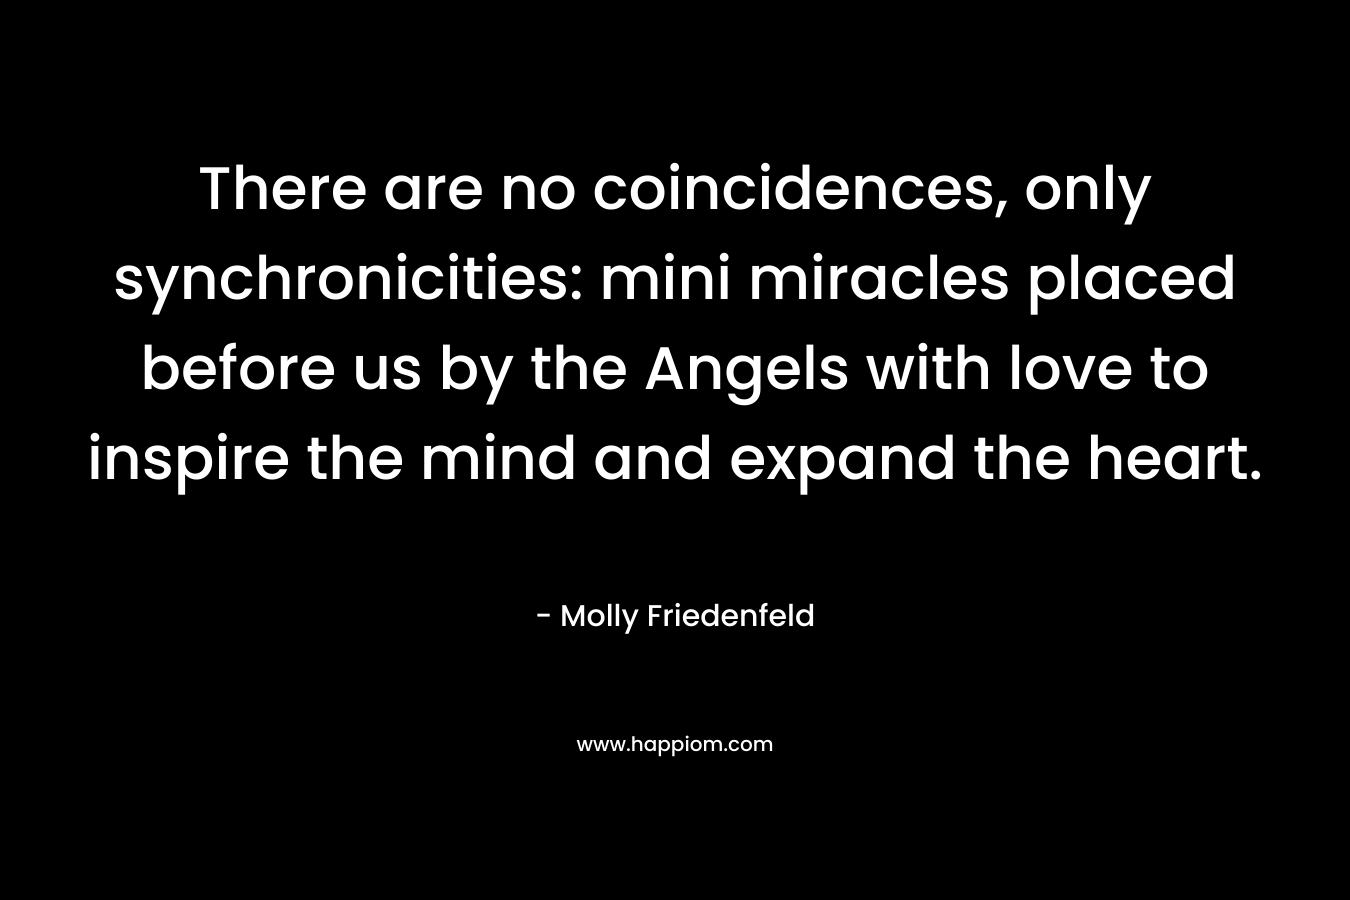 There are no coincidences, only synchronicities: mini miracles placed before us by the Angels with love to inspire the mind and expand the heart. – Molly Friedenfeld